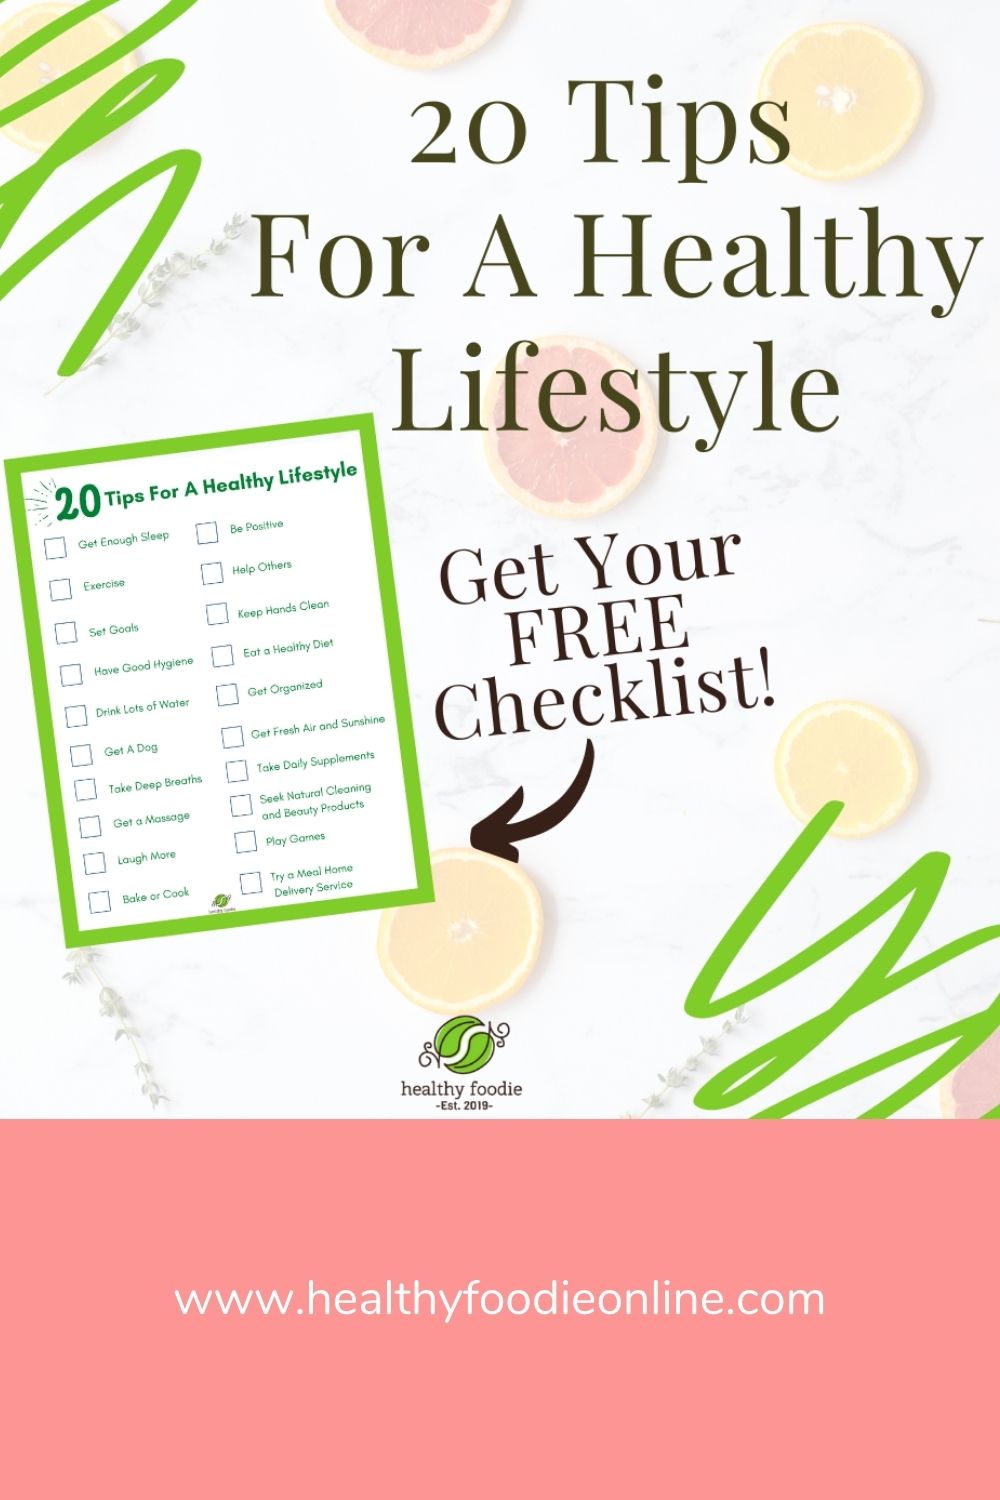 20 tips for a healthy lifestyle